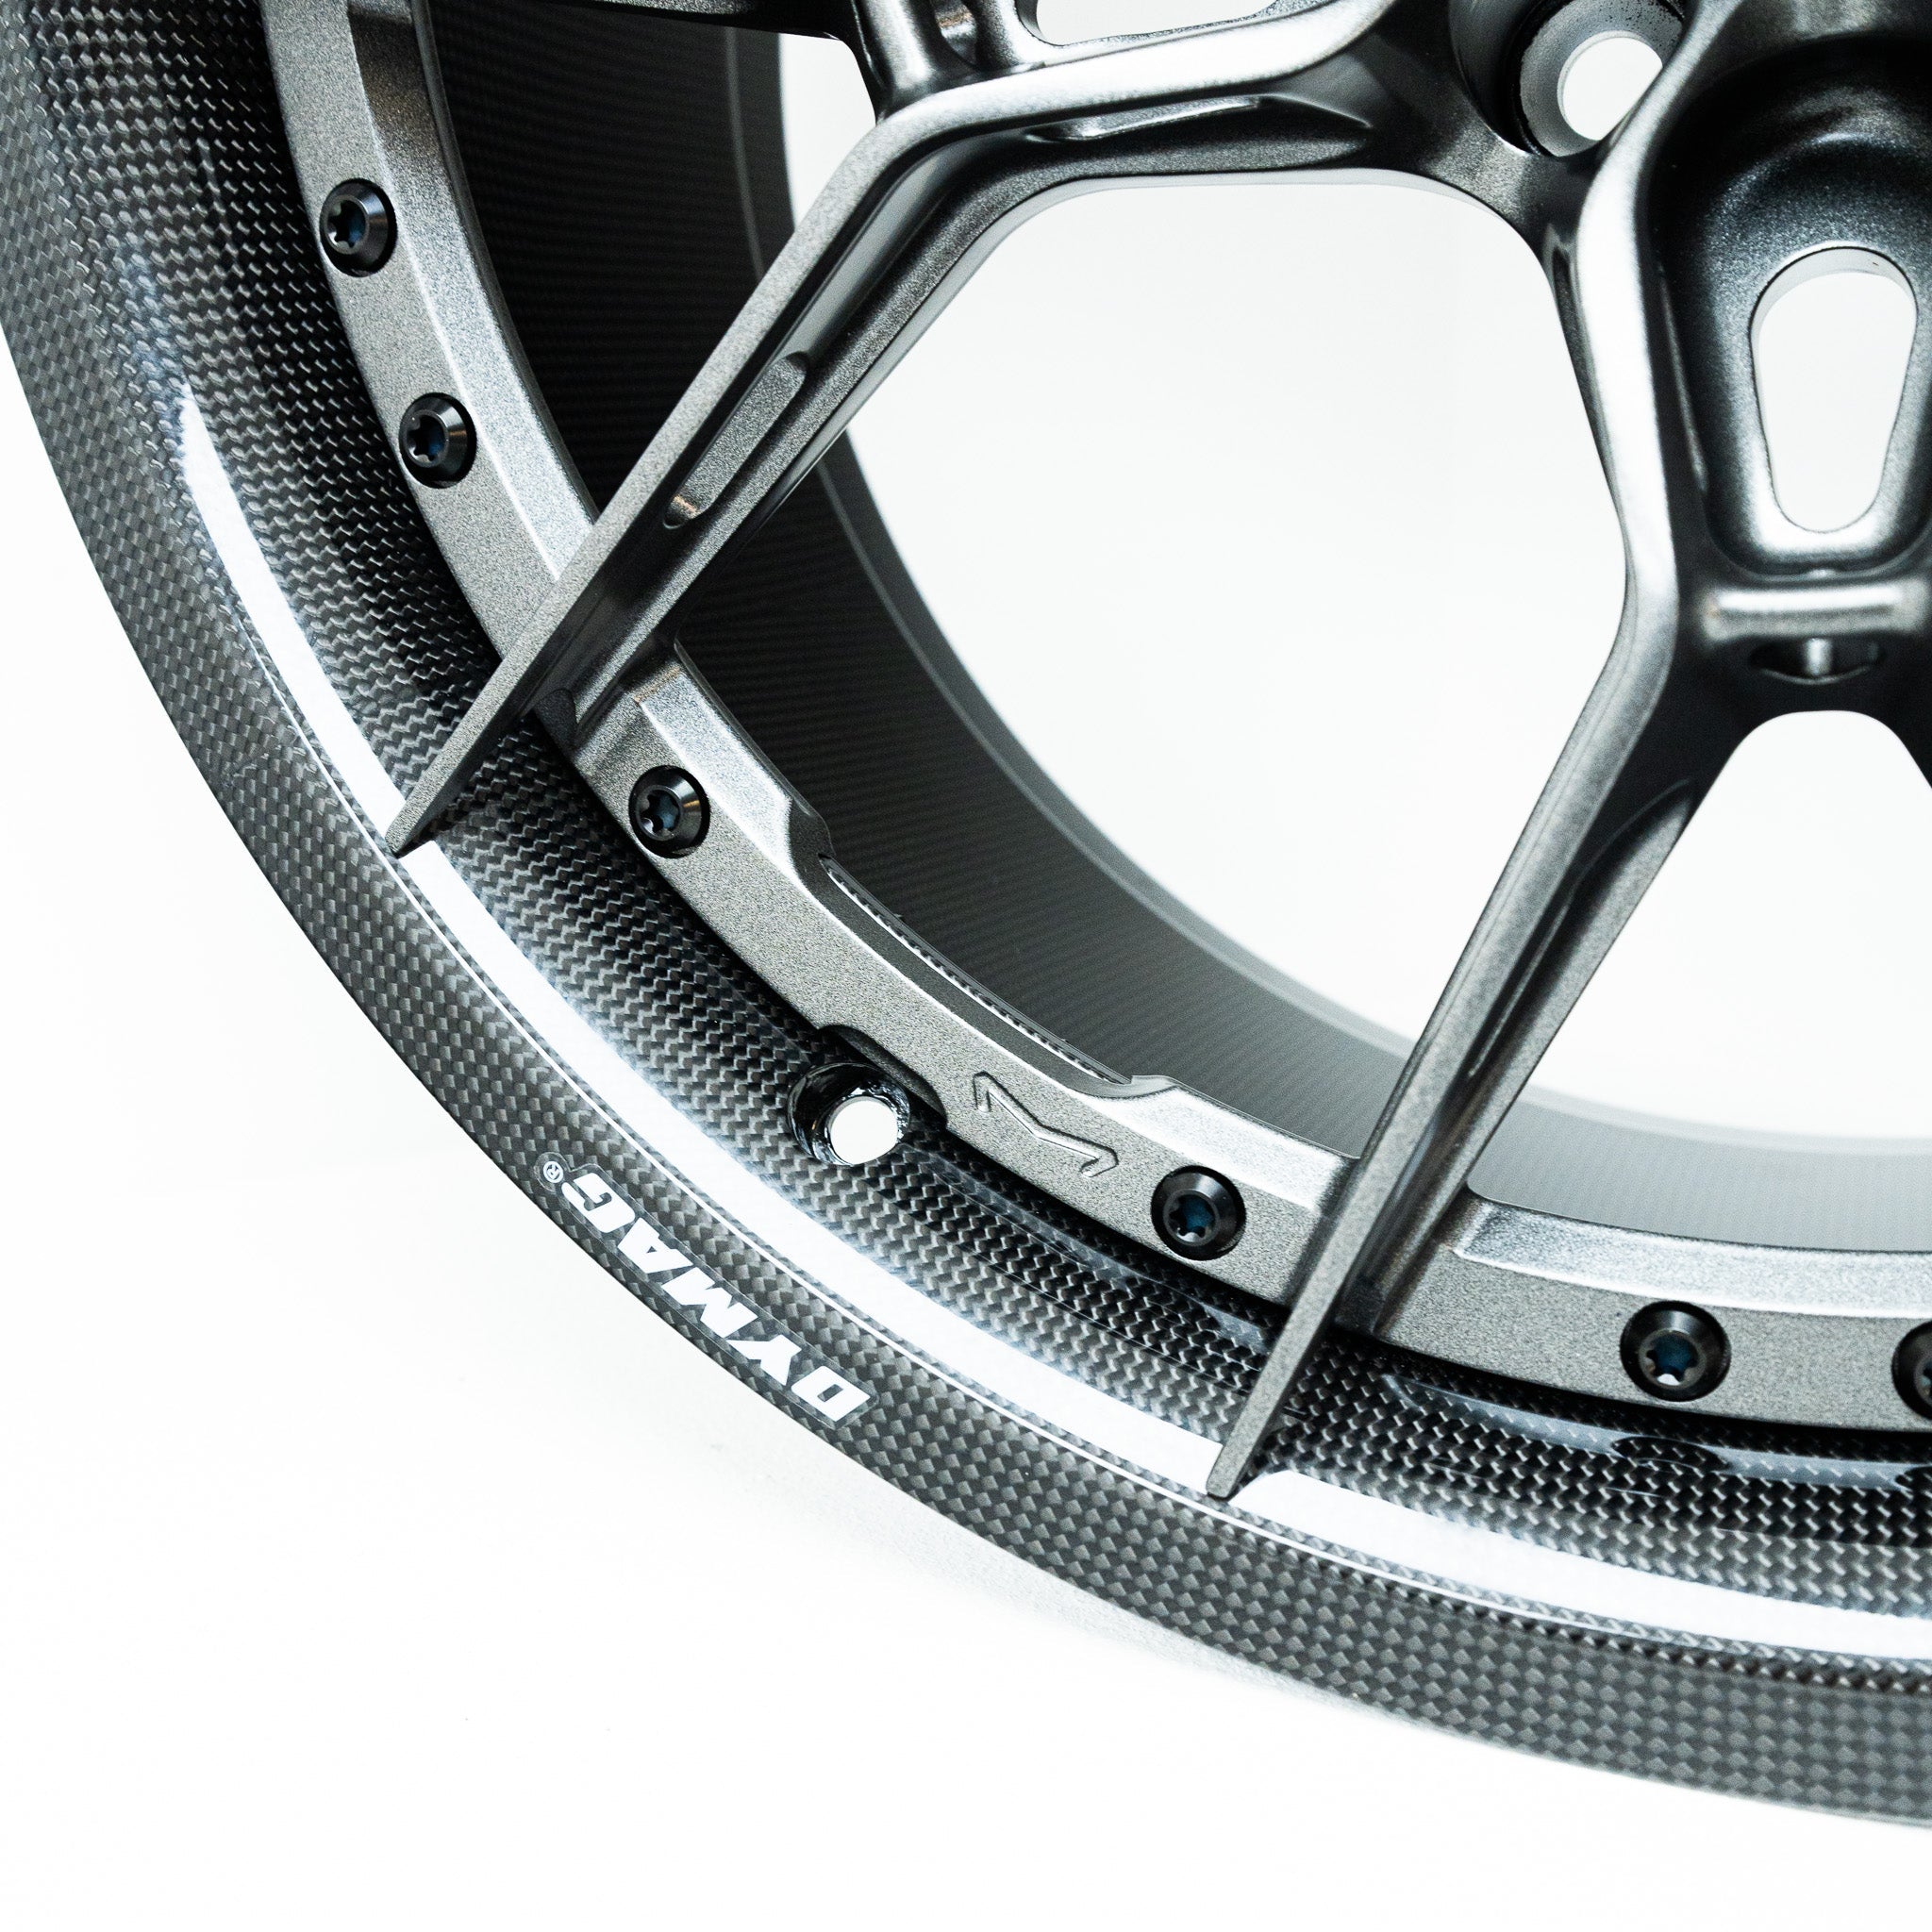 Dillinger x Dymag LF1 Forged Wheels, Forged Wheels, Dillinger Wheels - AUTOID | Premium Automotive Accessories